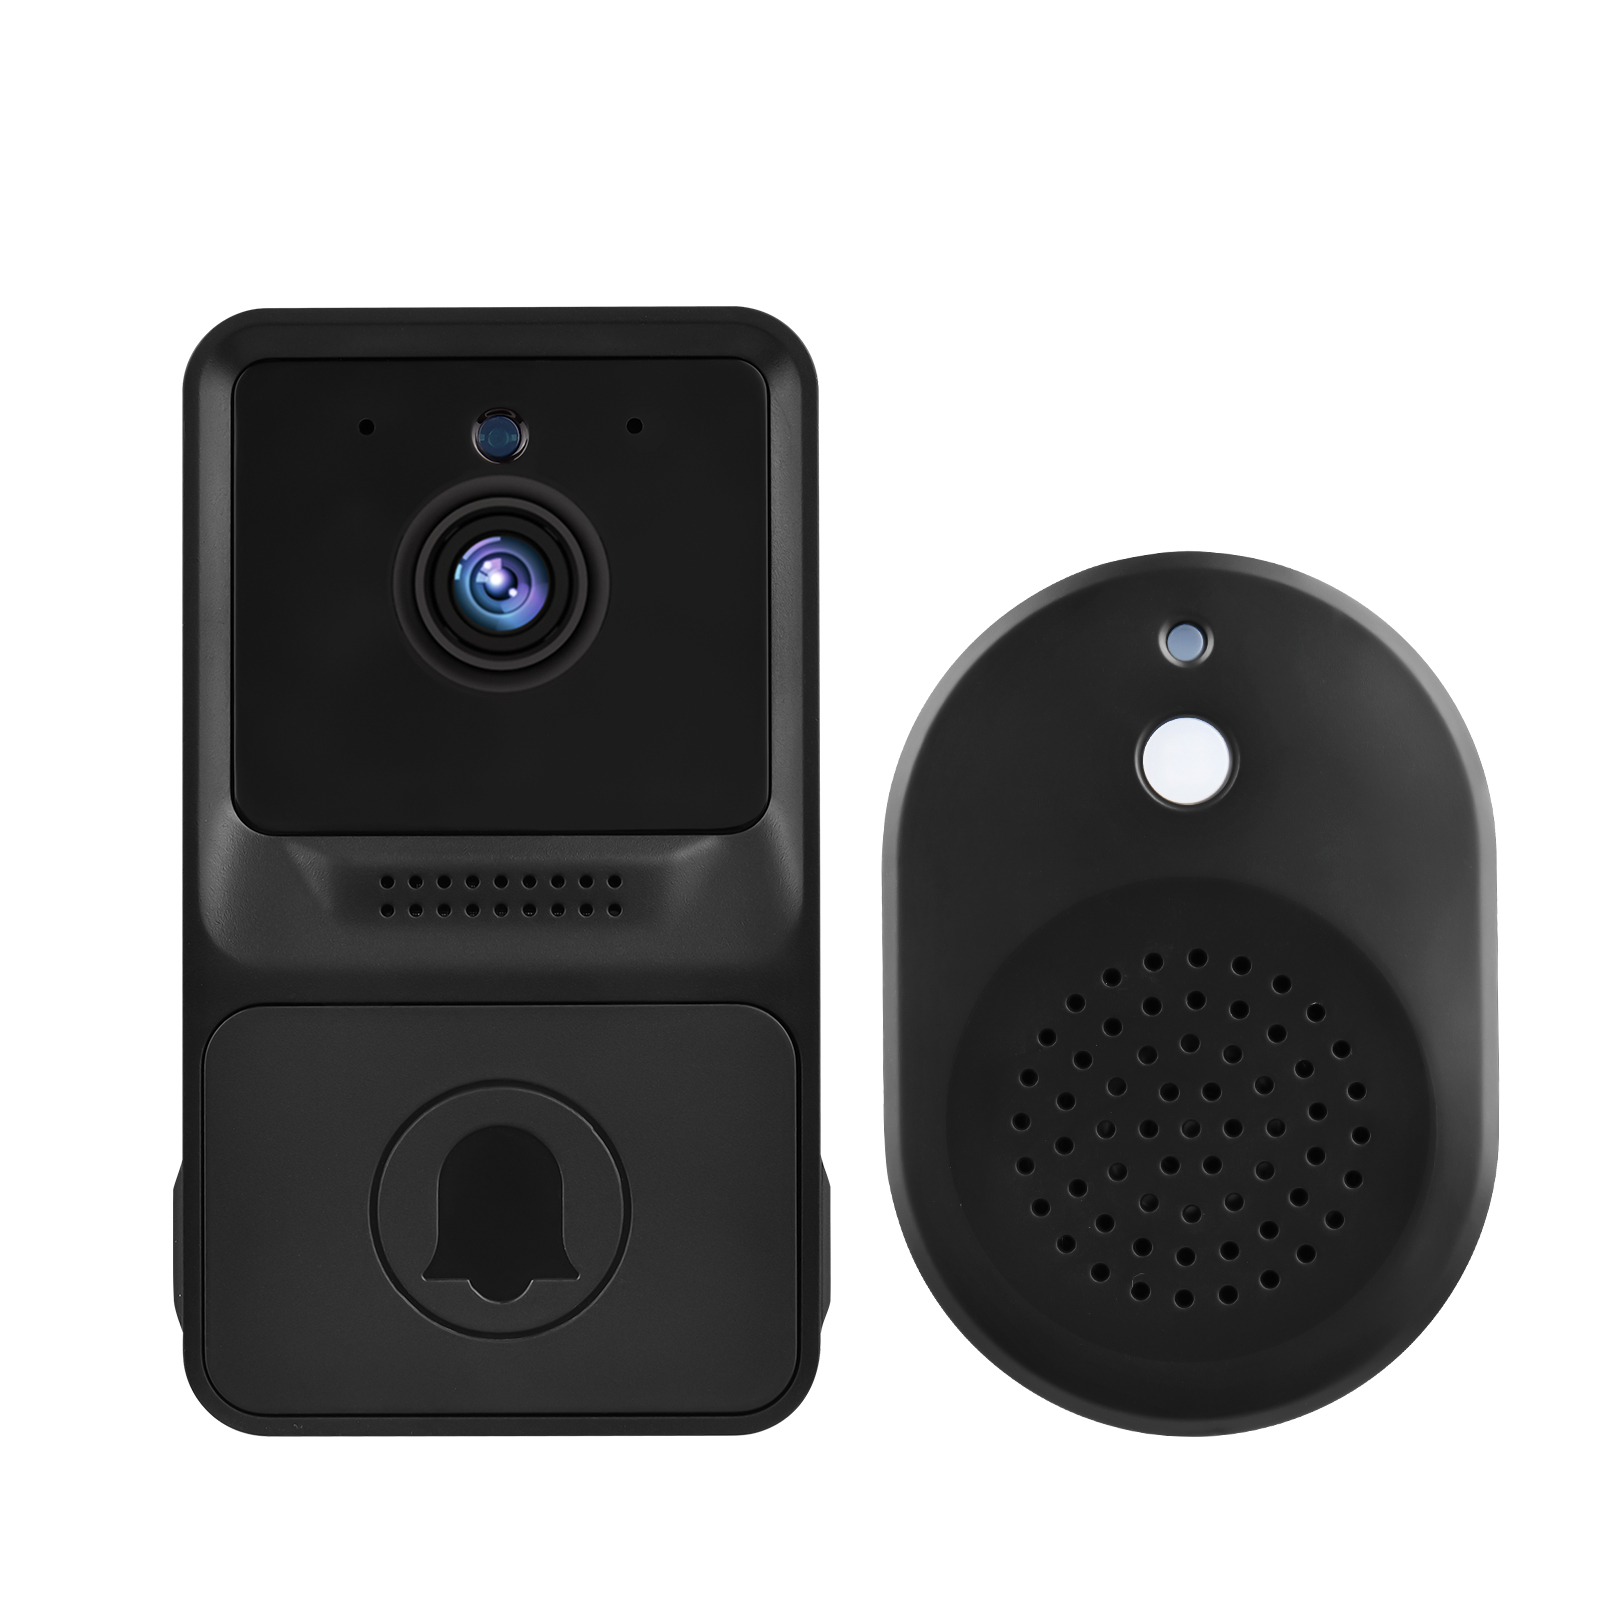 Smart Home Wifi Door Bell Outdoor Wireless Doorbell Camera Chime Two-way Audio Intercom Night Vision Works with Aiwit Security